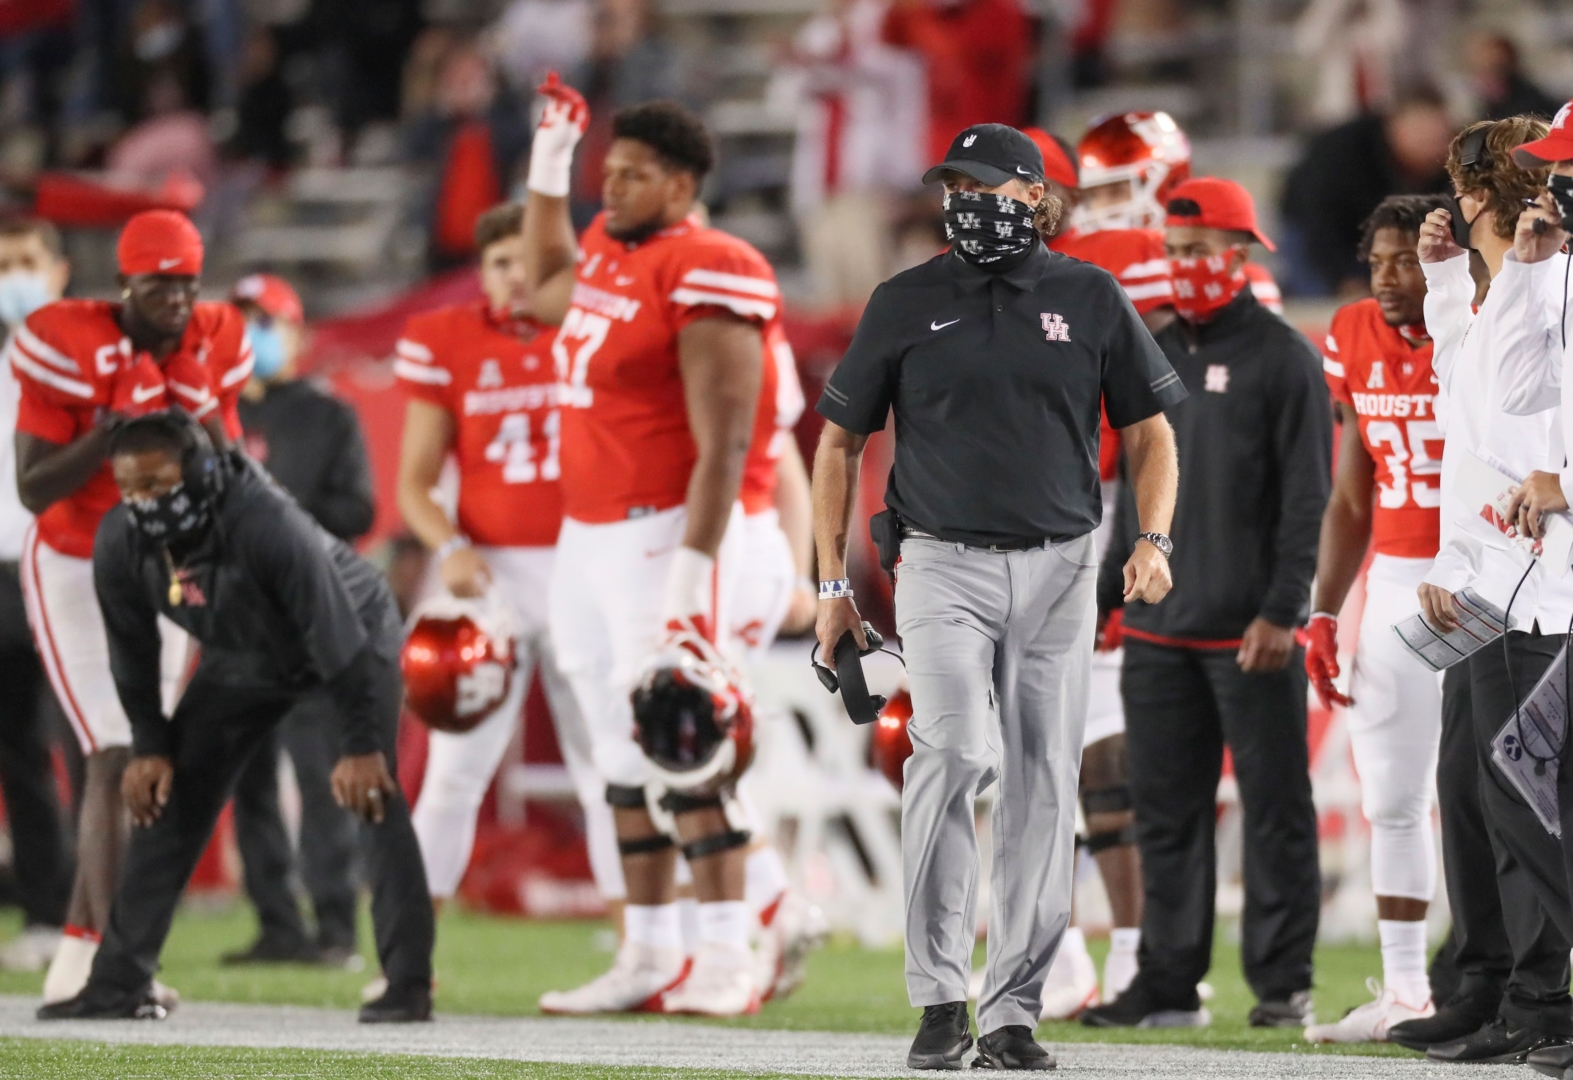 UH football head coach scans the field during the 2020 season-opening game against Tulane at TDECU Stadium. The program has now had seven games postponed due to COVID-19, with the latest coming against Tulsa. | Courtesy of UH athletics